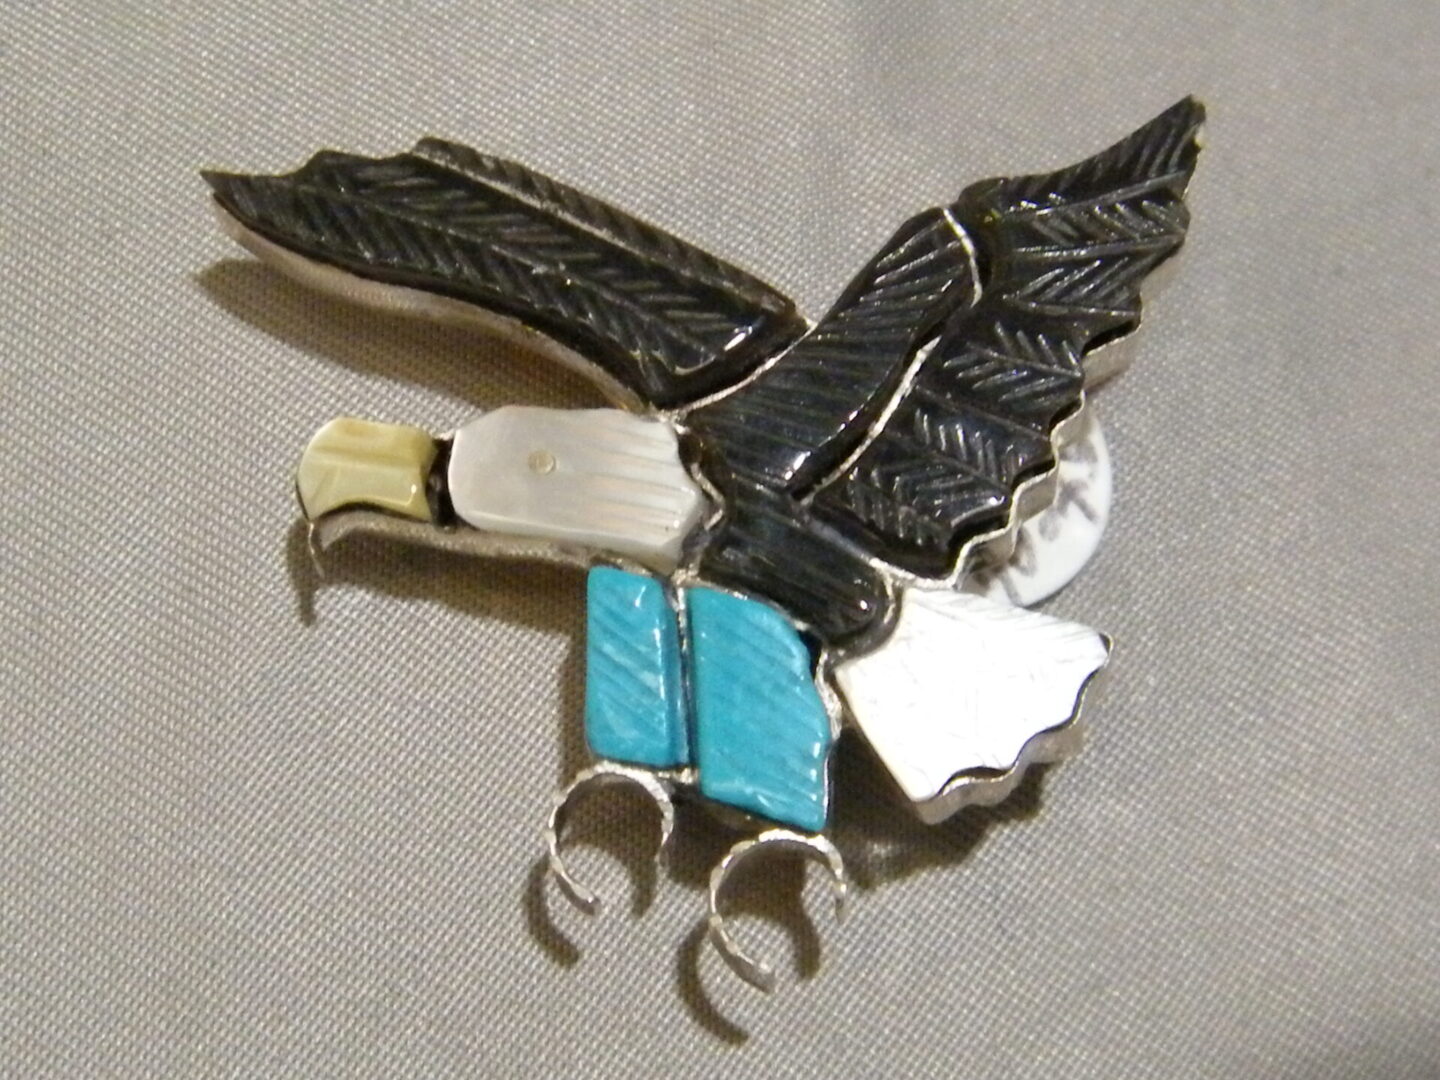 Zuni Indian Eagle Pin/Pendant Sterling Silver Jet Turquoise Mop Stephan Lonjose